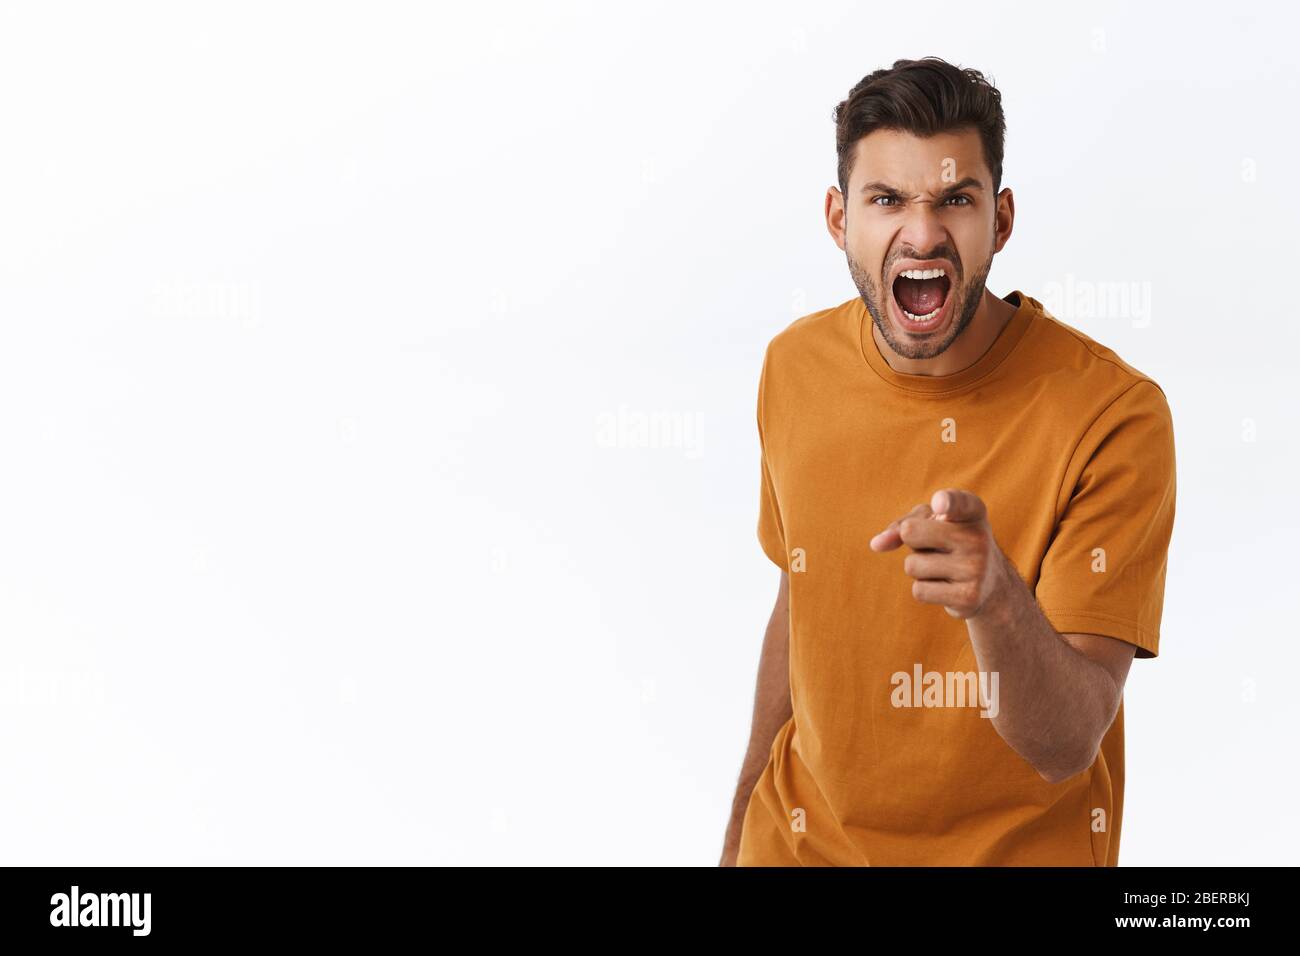 Angry, distressed outraged young man with beard, losing temper and accusing someone, swearing, say rude words during argument, pointing camera as Stock Photo